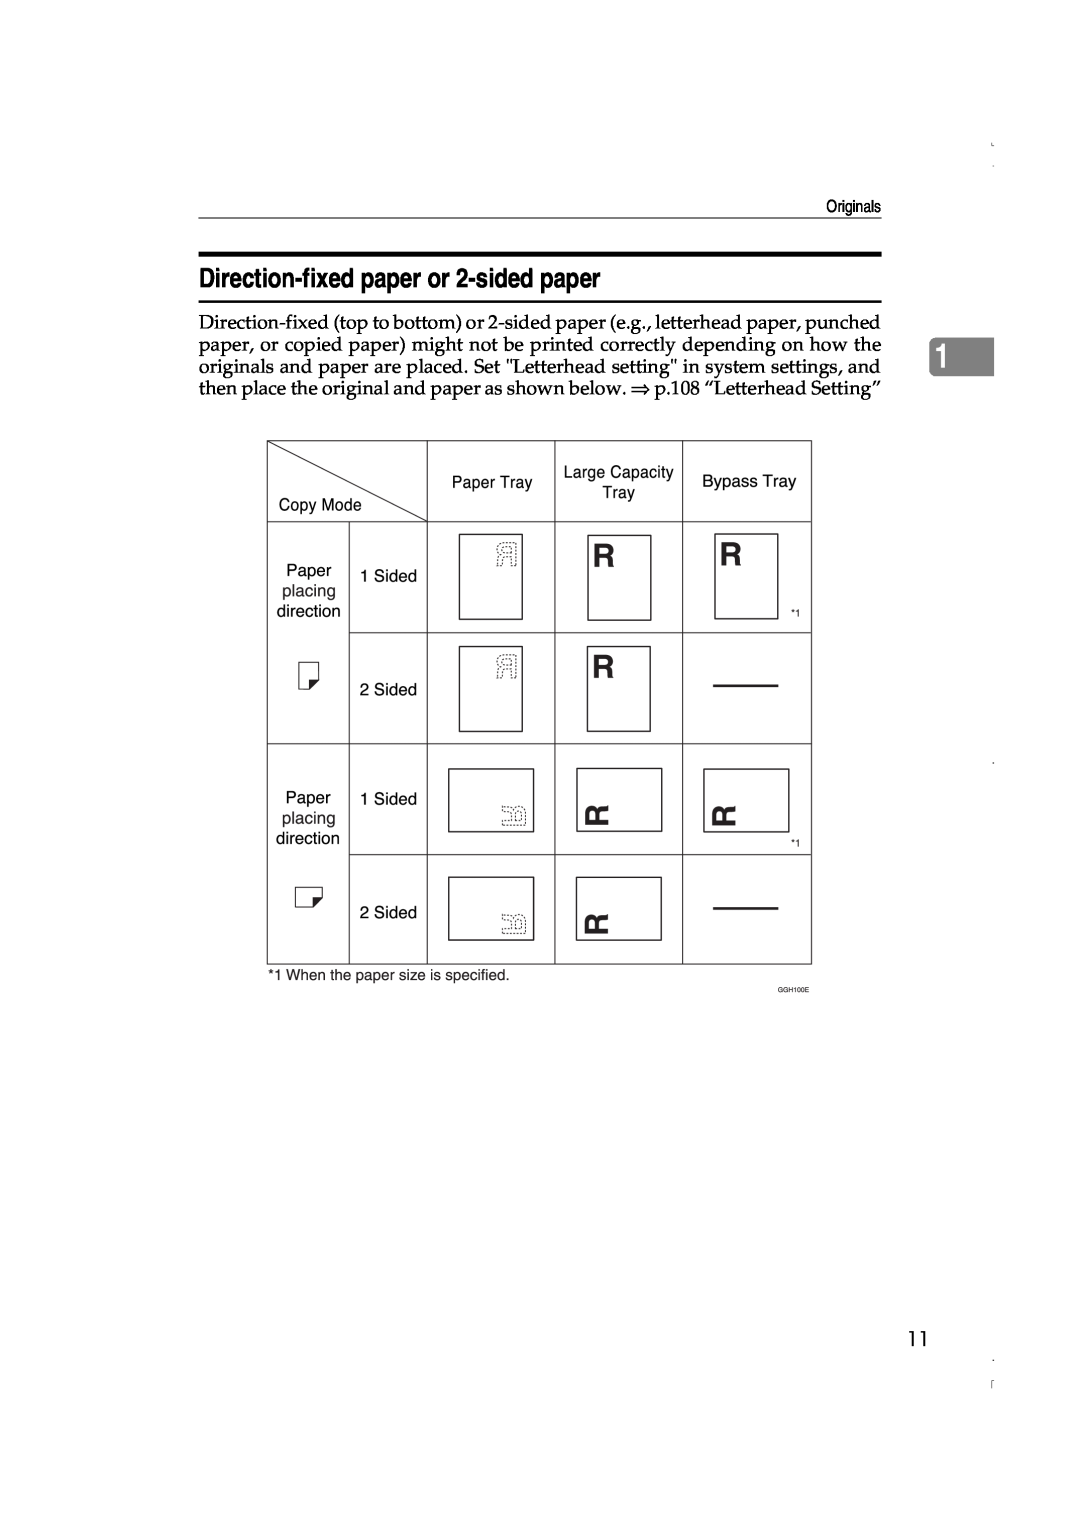 Lanier LD060, LD075 manual Direction-fixed paper or 2-sided paper 